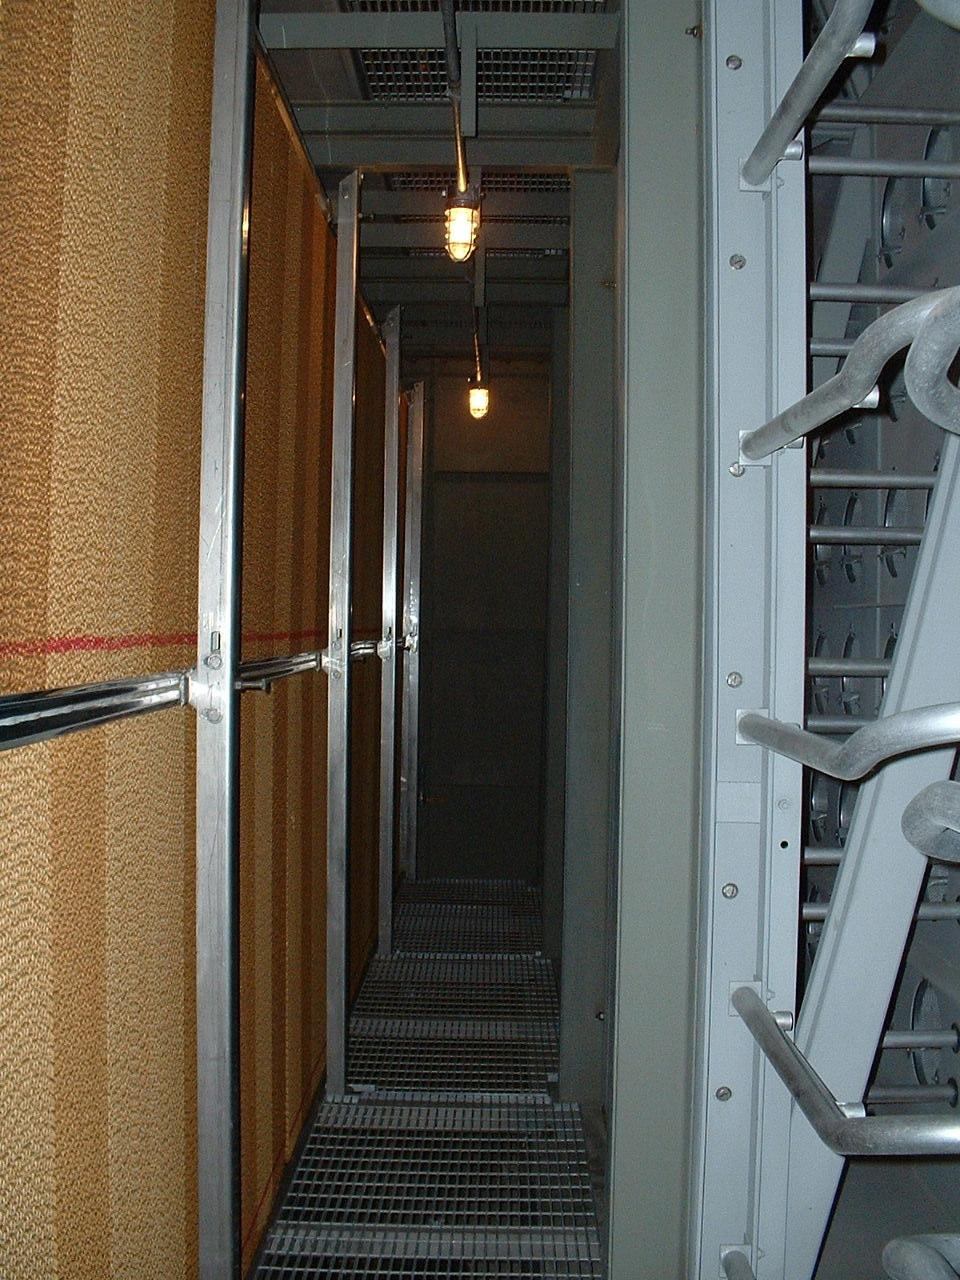 Figure 3 shows an internal view of the lowest of the three EC media banks illustrated in Figure 2. Each bank of media measures 44 ft wide by 12 ft tall.